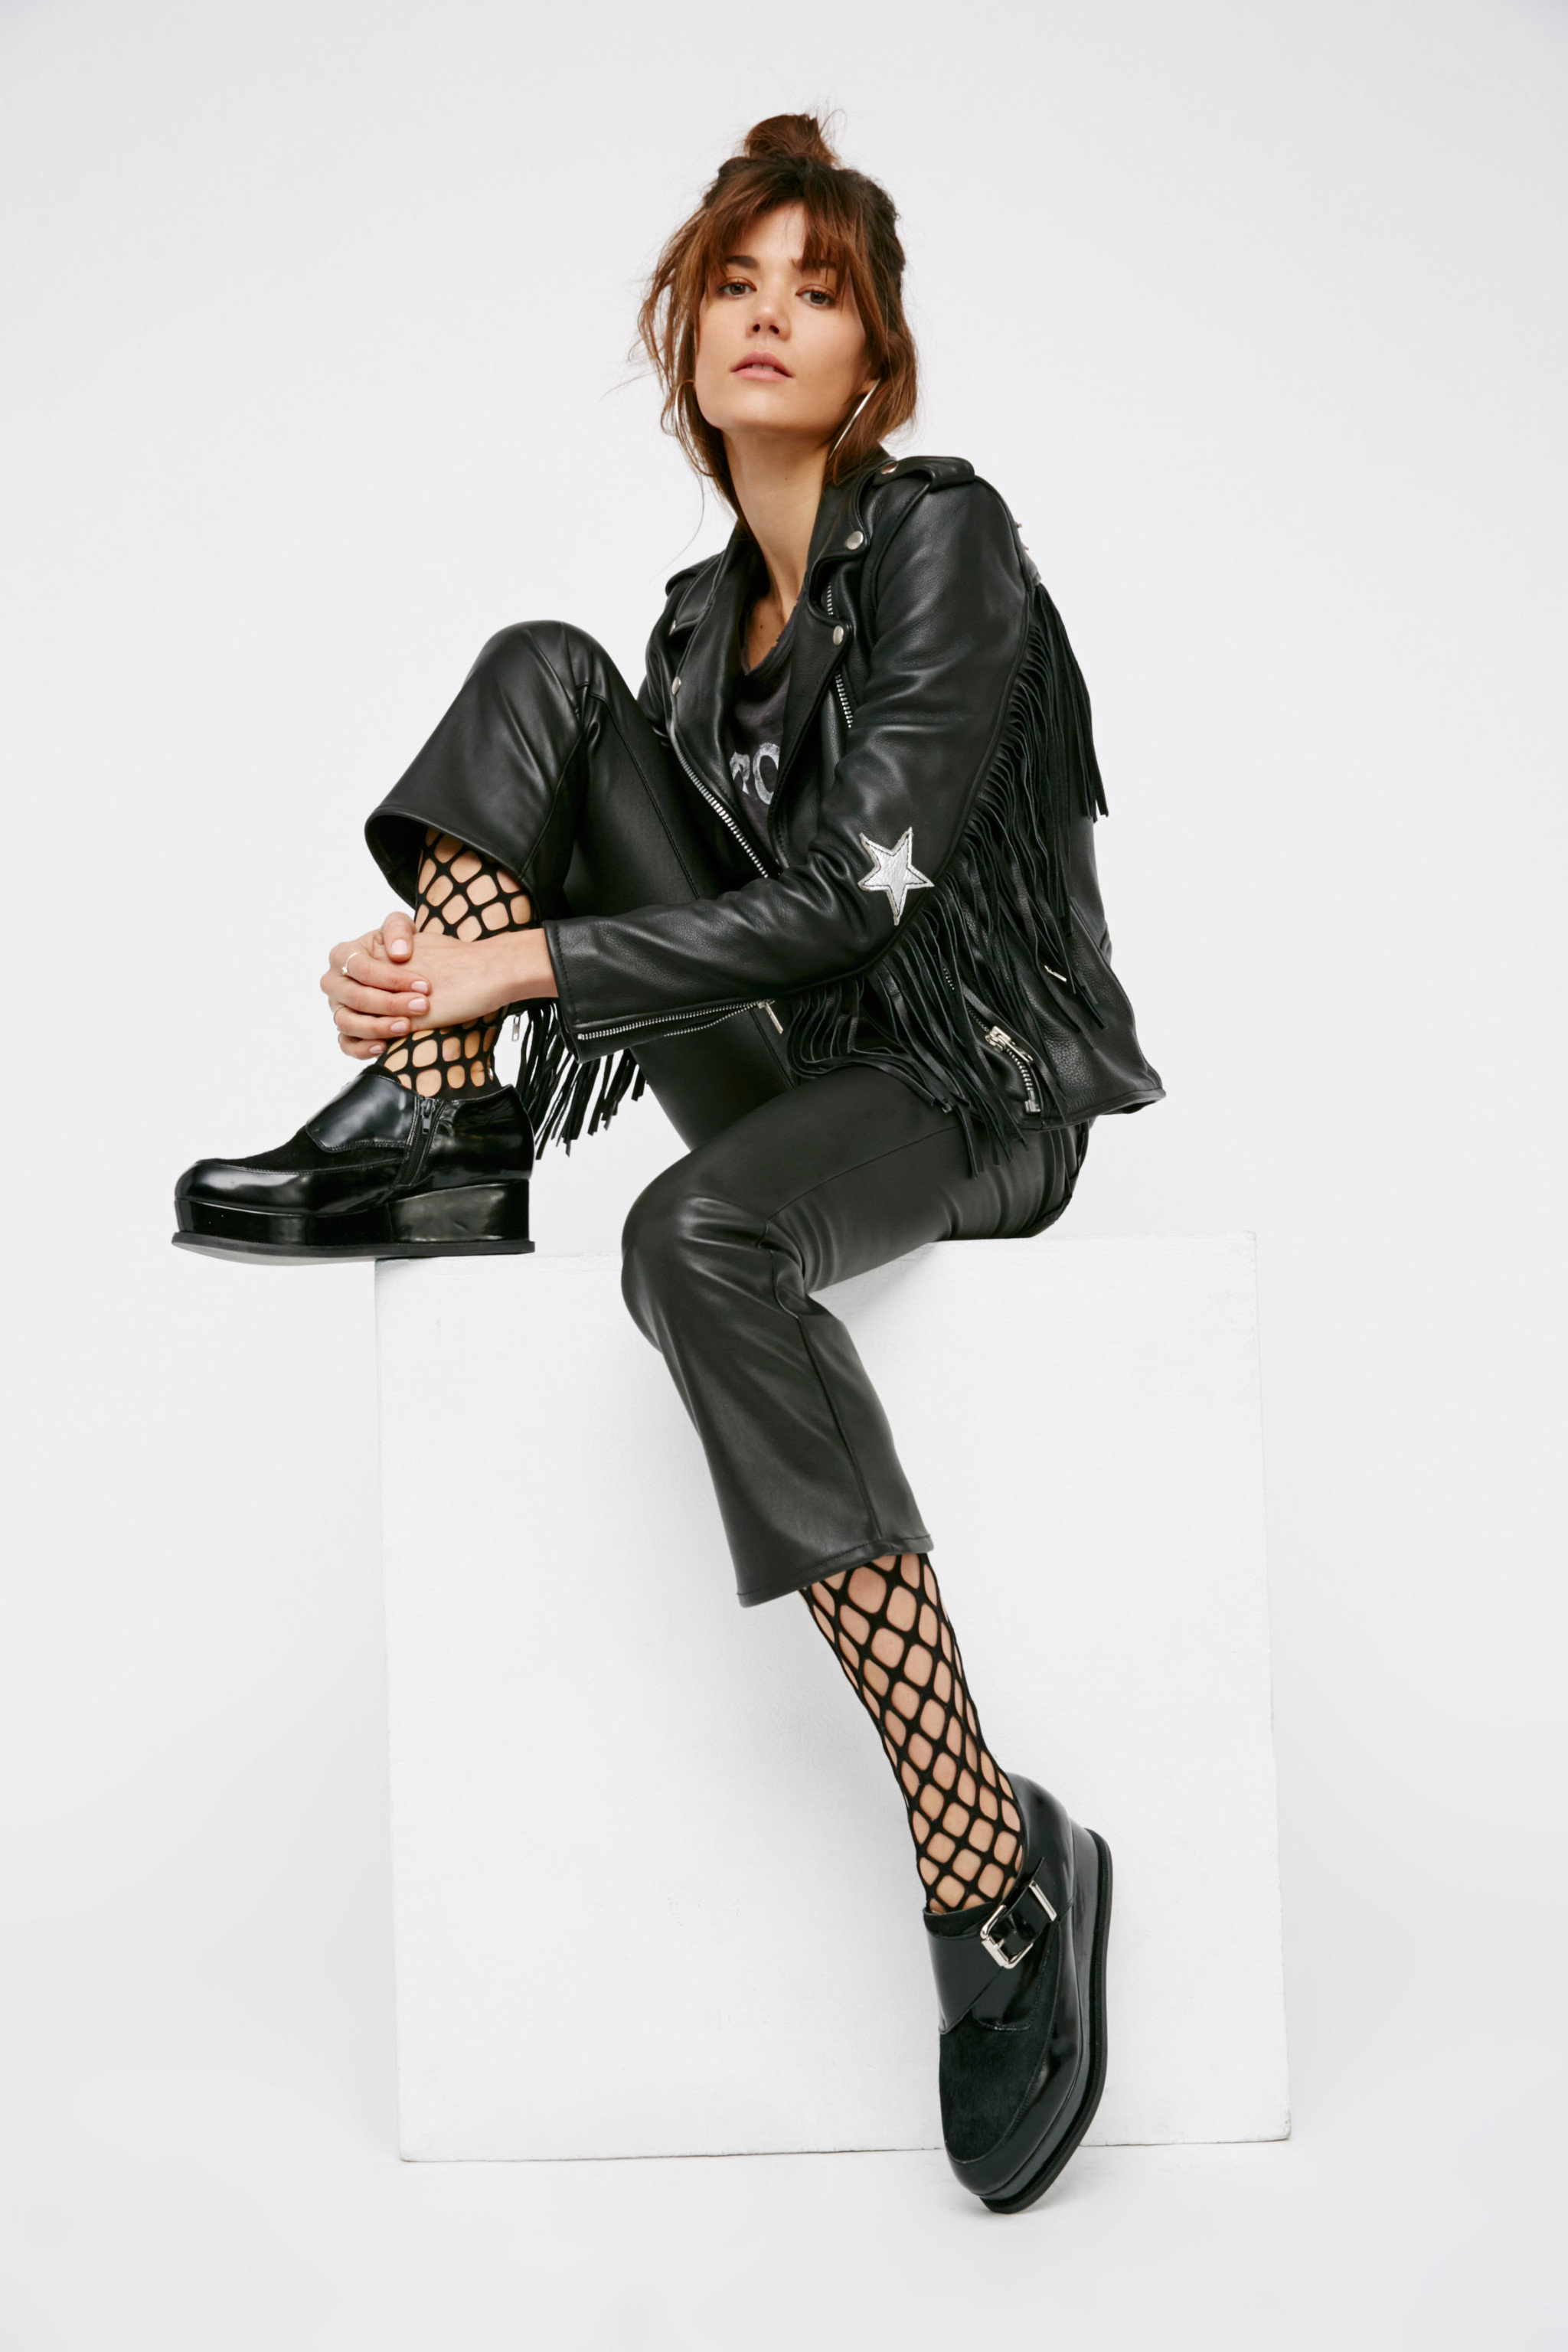 Style + Design person black clothing leather footwear sleeve jacket photo shoot fashion spring textile outerwear model leather jacket leg air trousers material collar formal wear